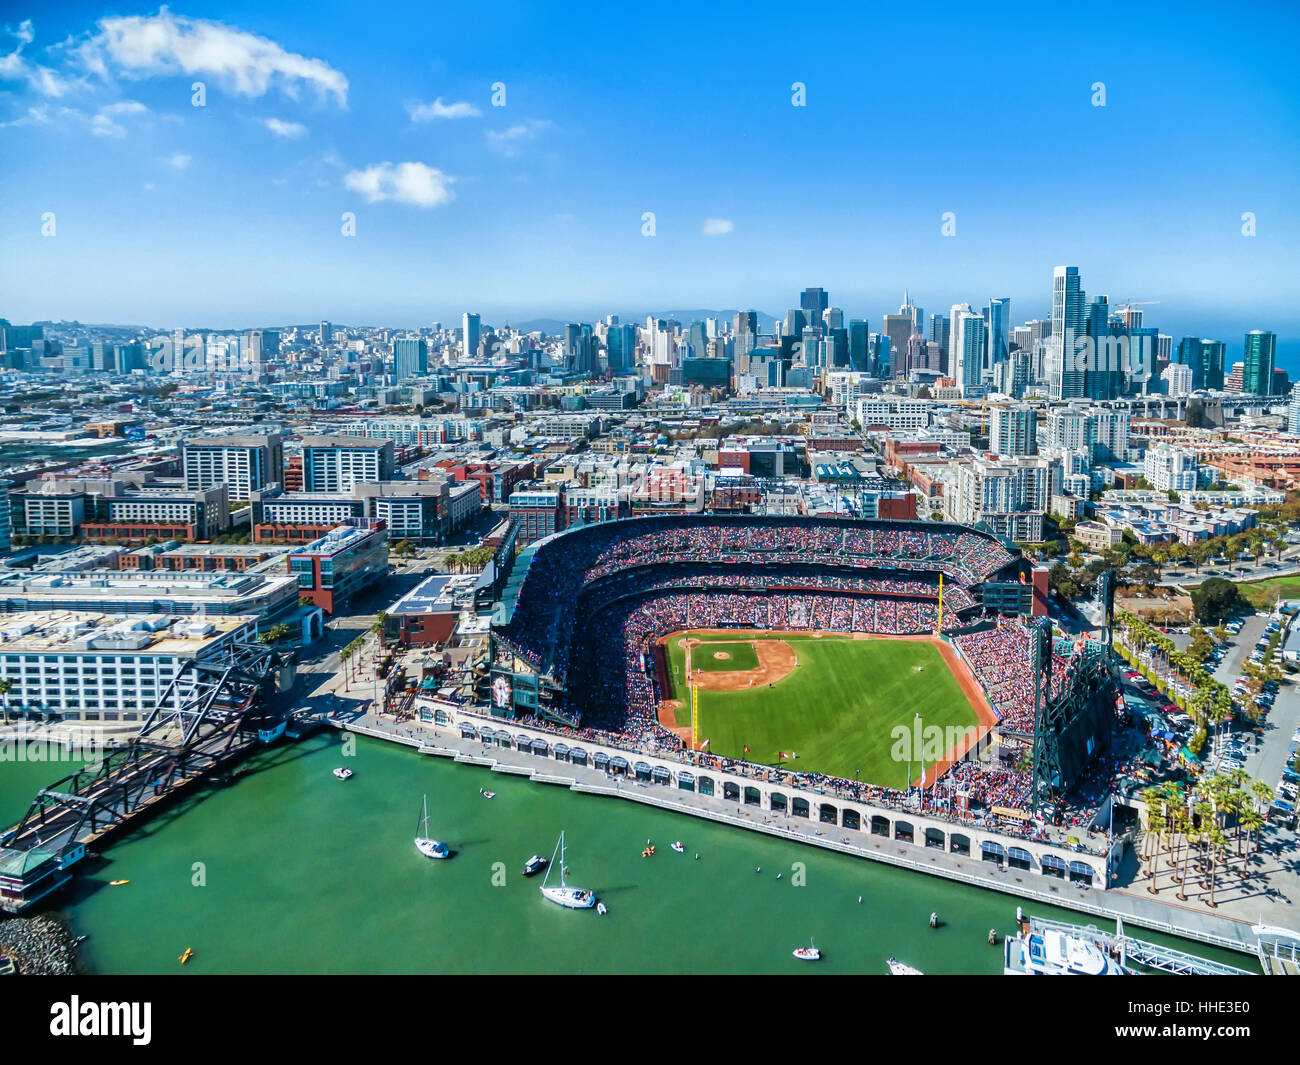 Size: 8 x 10 AT&T Park San Francisco Giants Aerial City View Photo